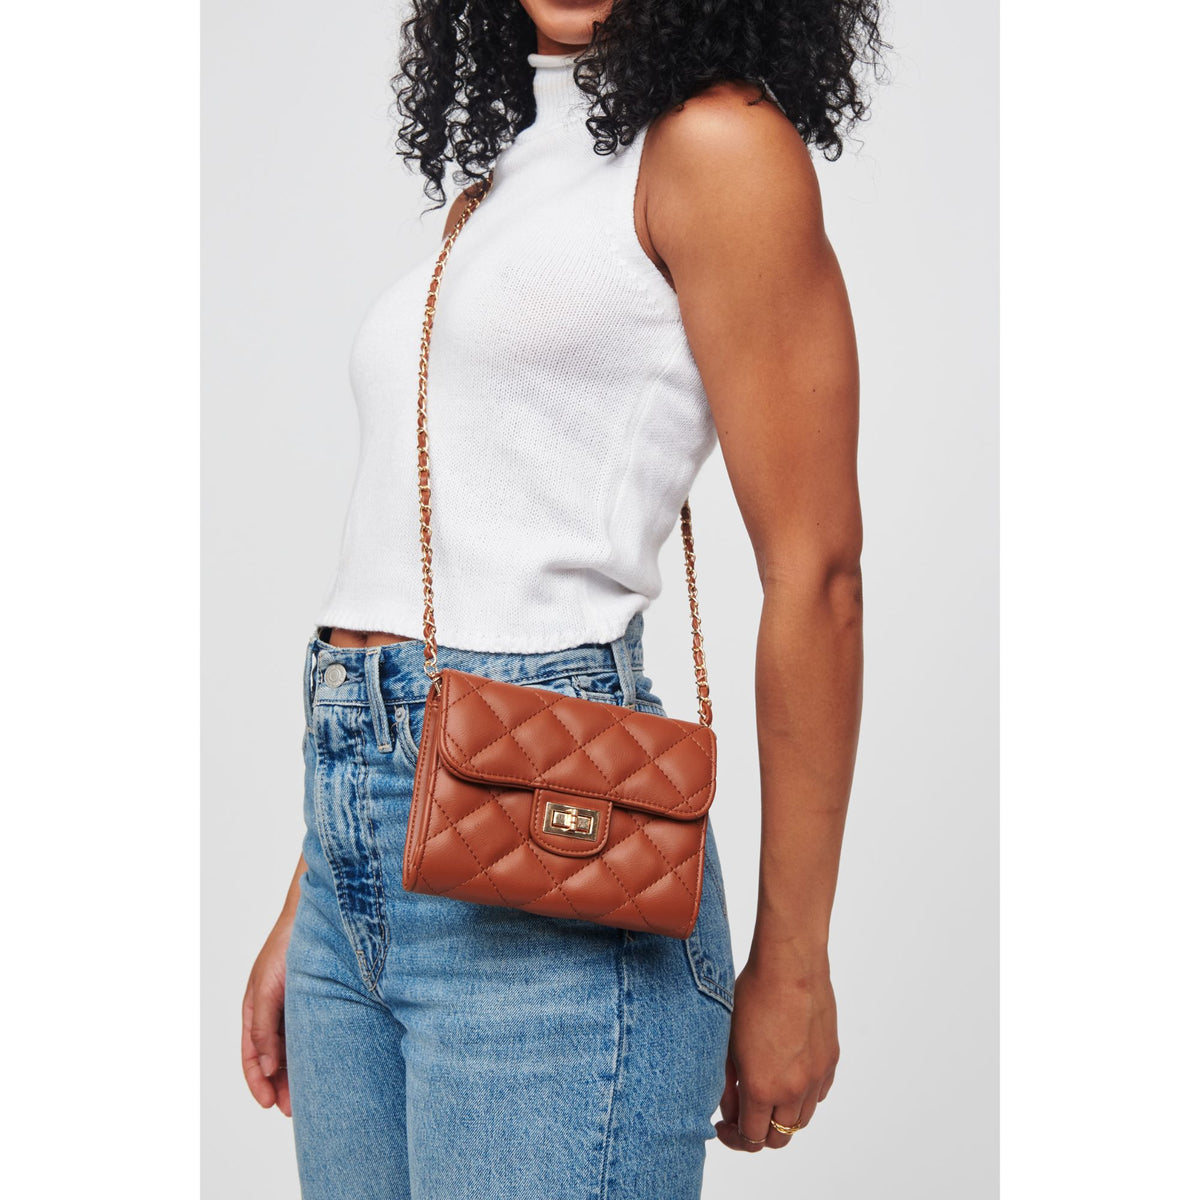 Woman wearing Cognac Urban Expressions Wendy - Quilted Crossbody 818209012126 View 1 | Cognac